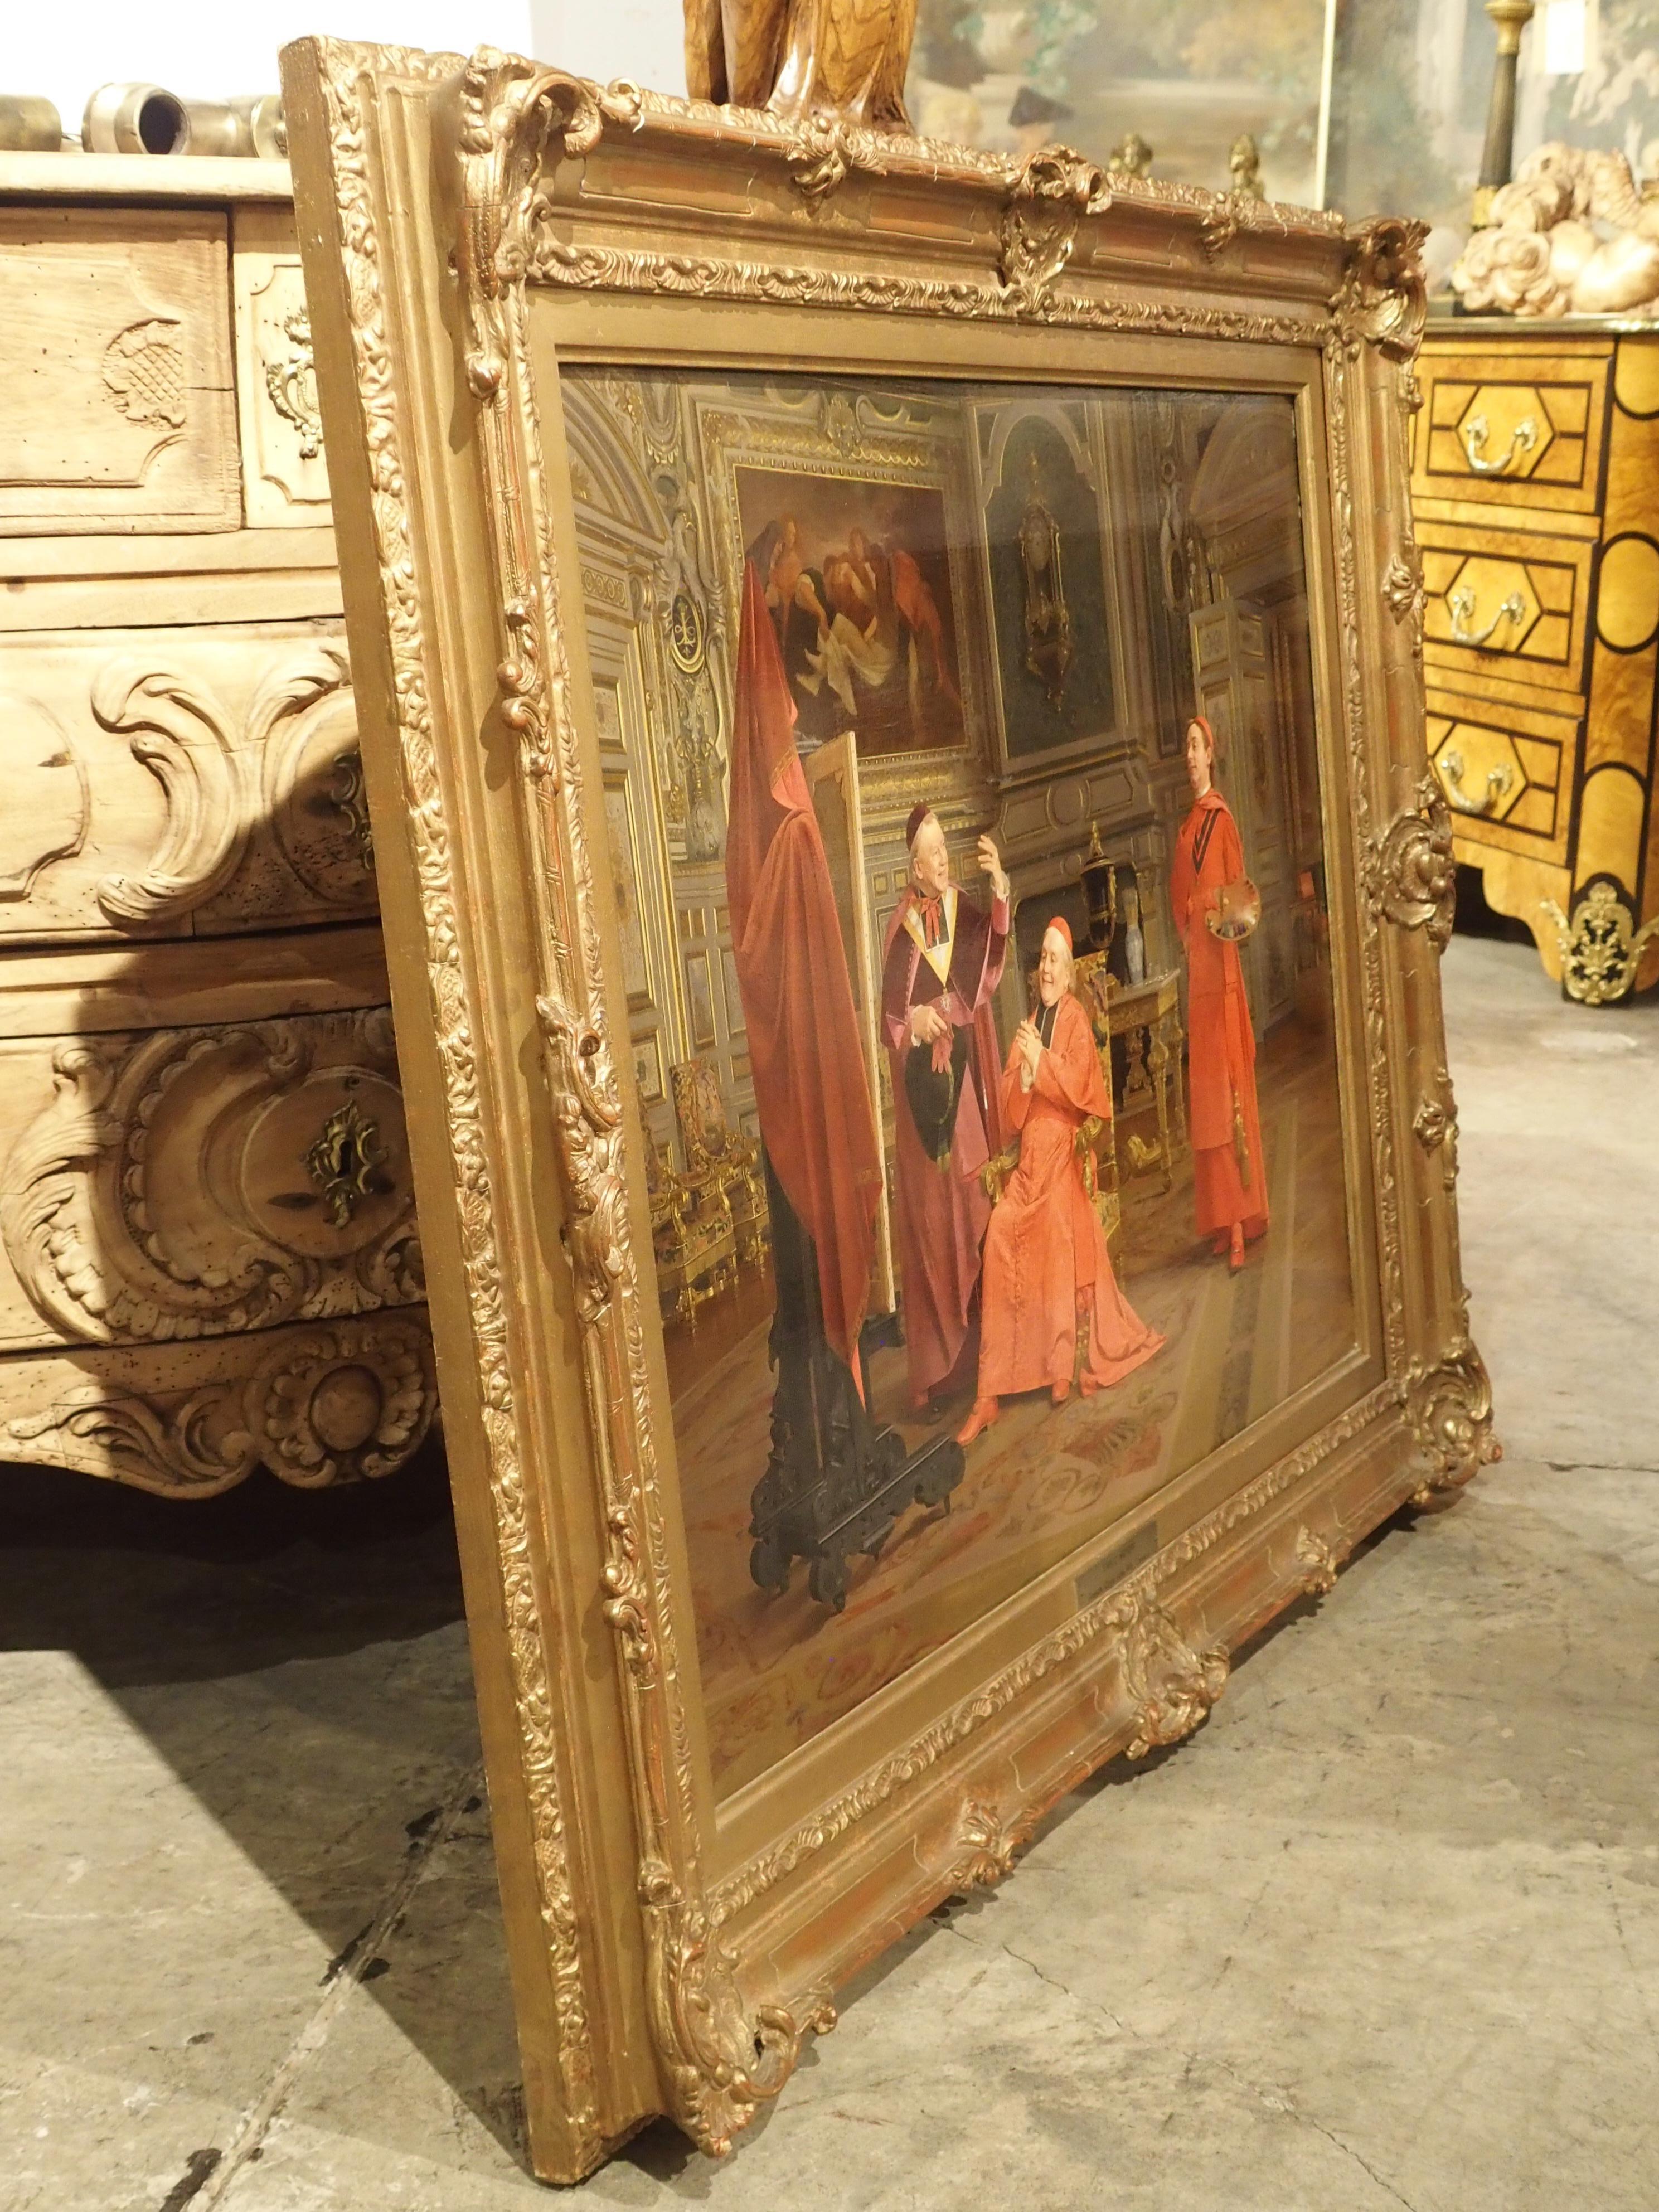 Antique French Oil Painting on Board, “The Unveiling” by Emile Meyer, 1823-1893 For Sale 10